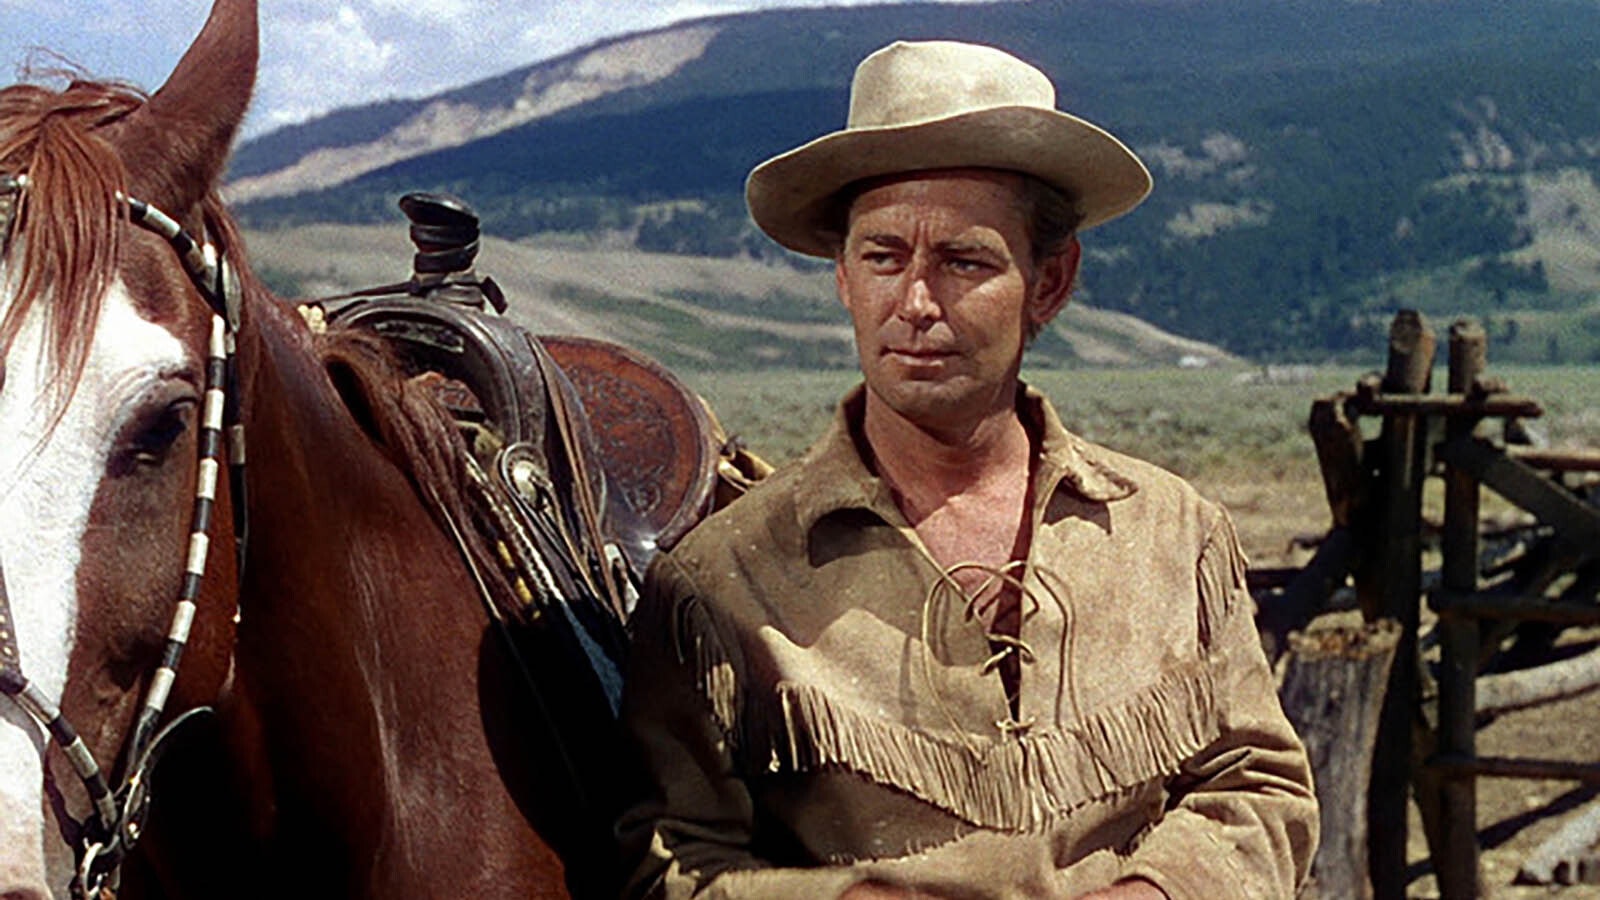 Alan Ladd starred in the 1953 classic "Shane," which was filmed in the Jackson Hole area.